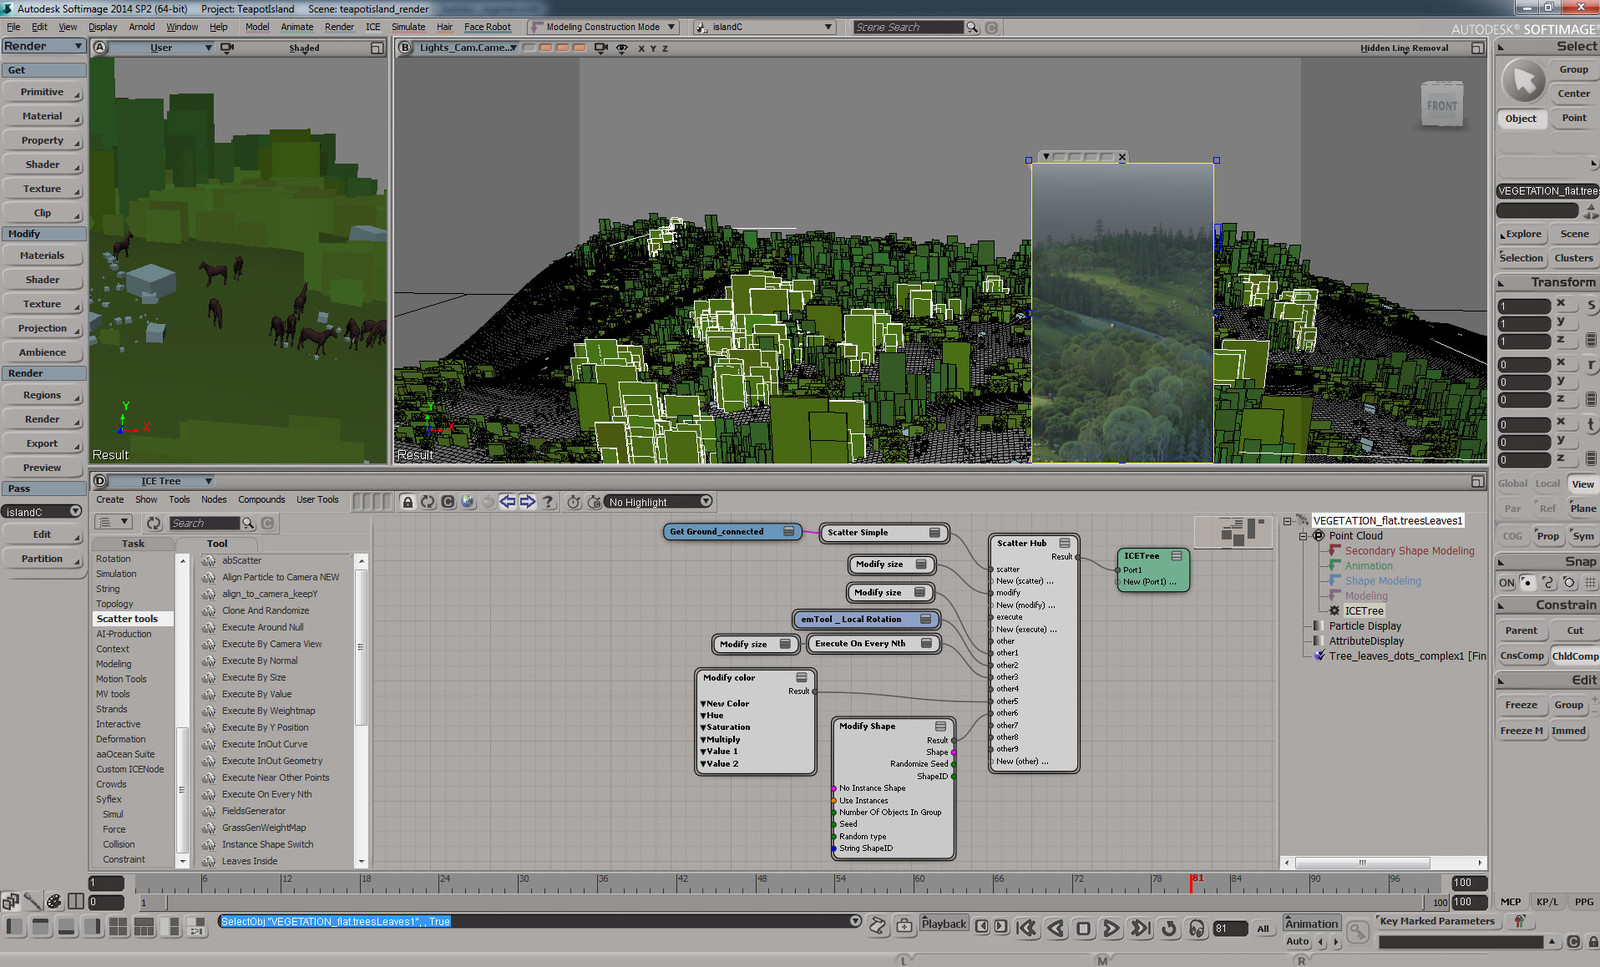 most of the work done in Softimage